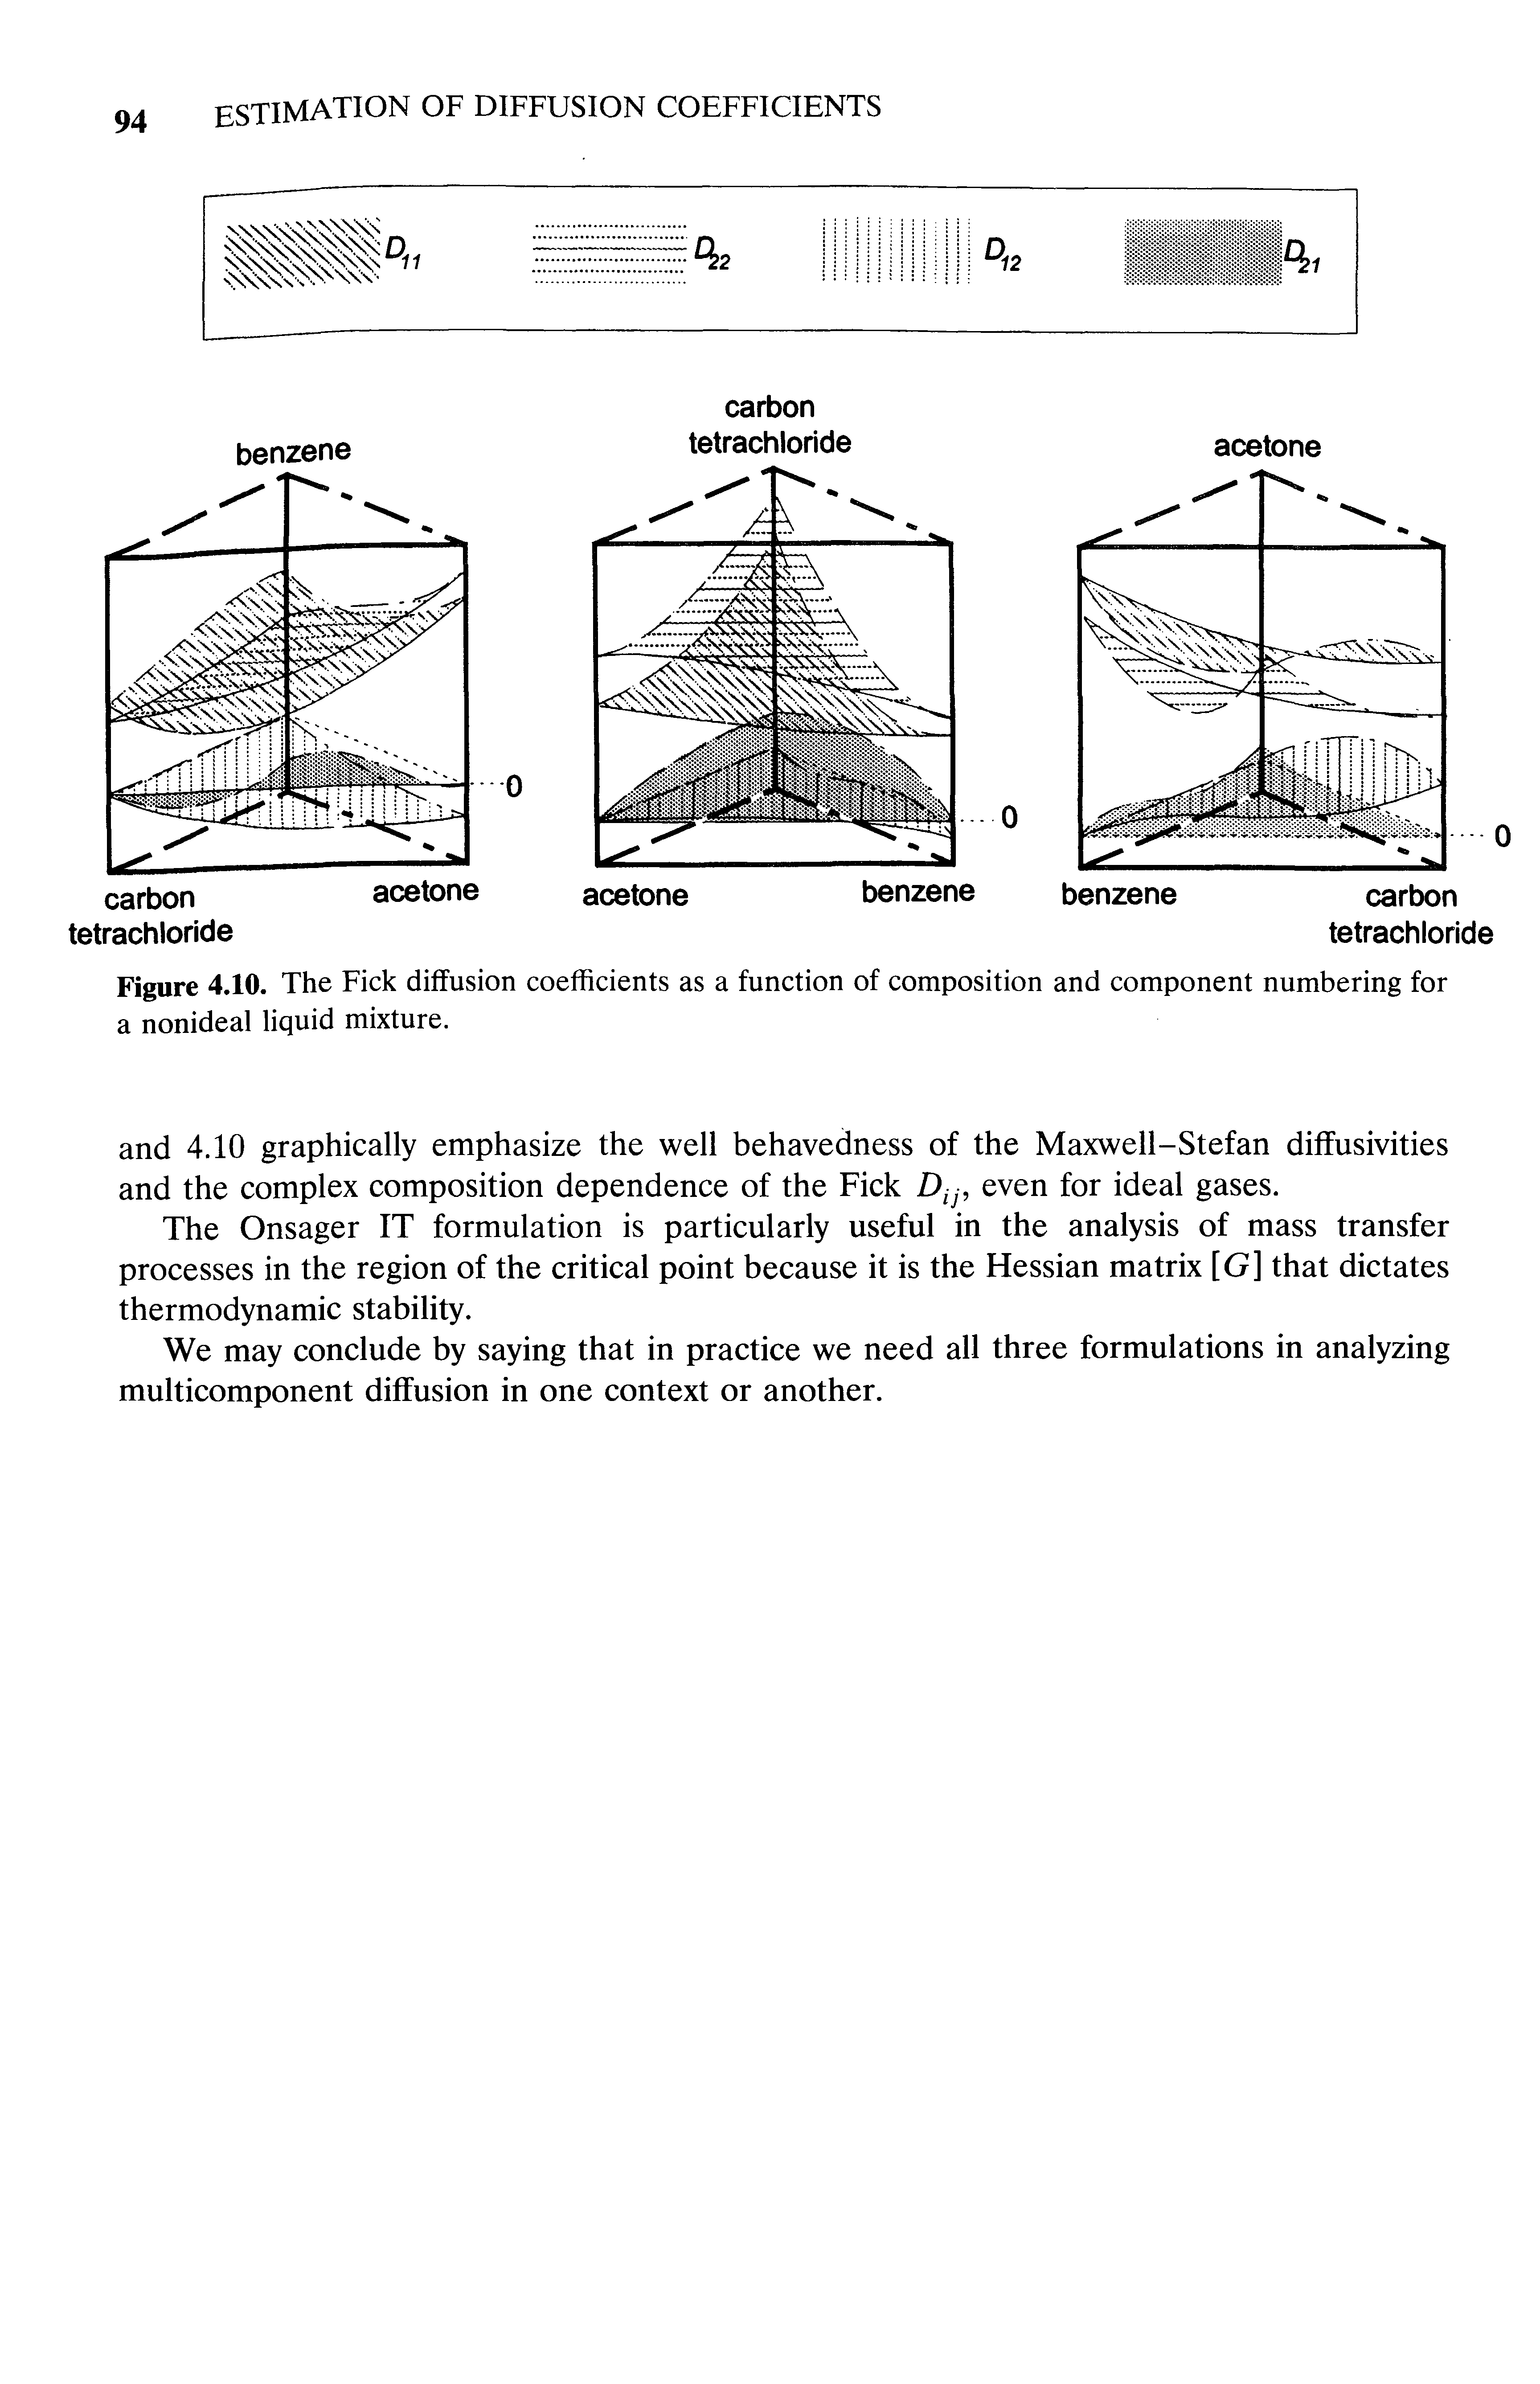 Figure 4.10. The Fick diffusion coefficients as a function of composition and component numbering for a nonideal liquid mixture.